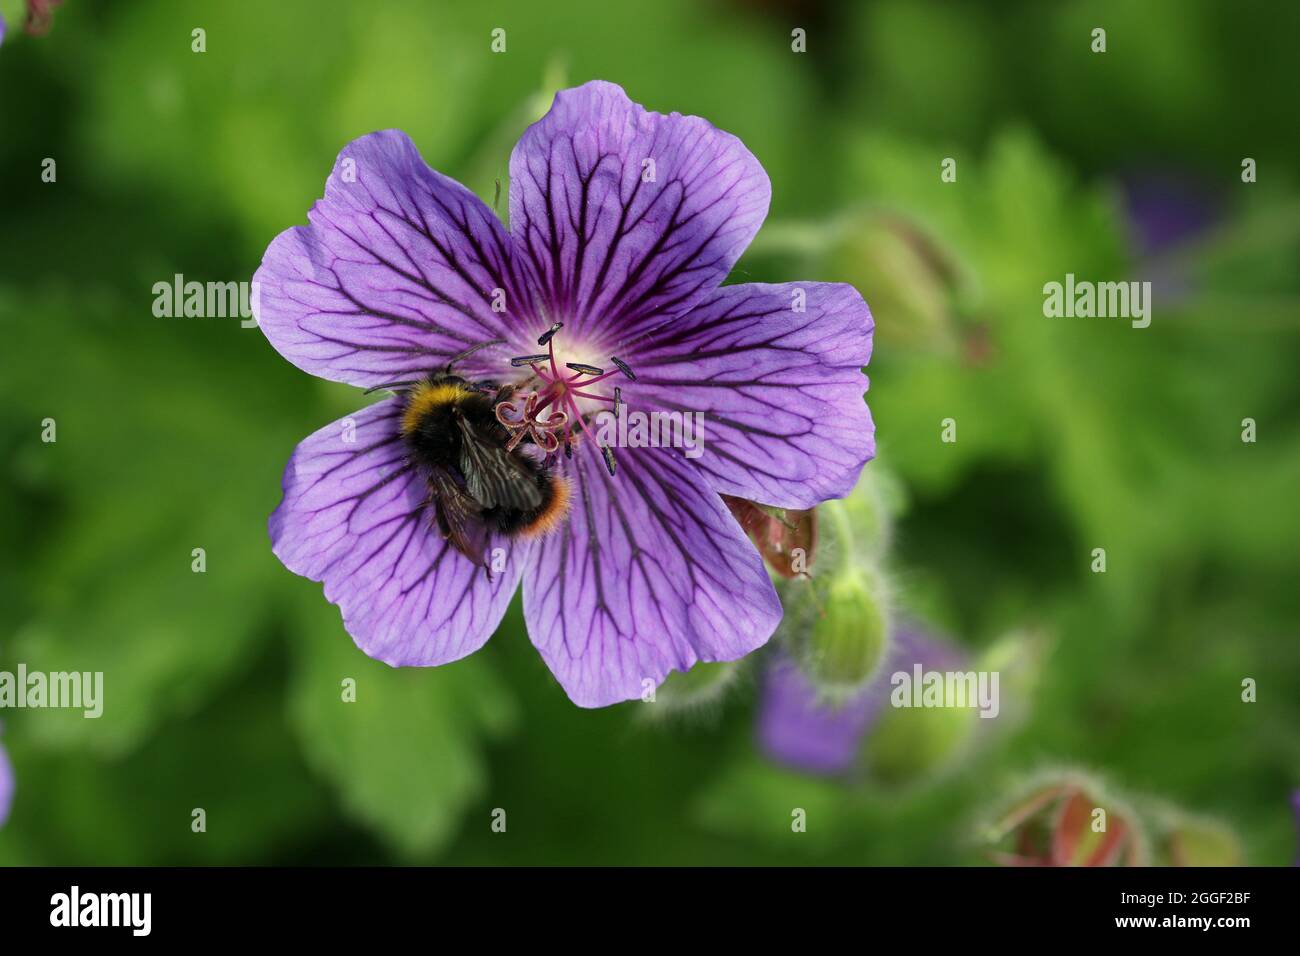 Purple cranesbill, unknown Geranium species, flower in close up with an early bumble bee, Bombus pratorum, and a background of blurred leaves and buds Stock Photo